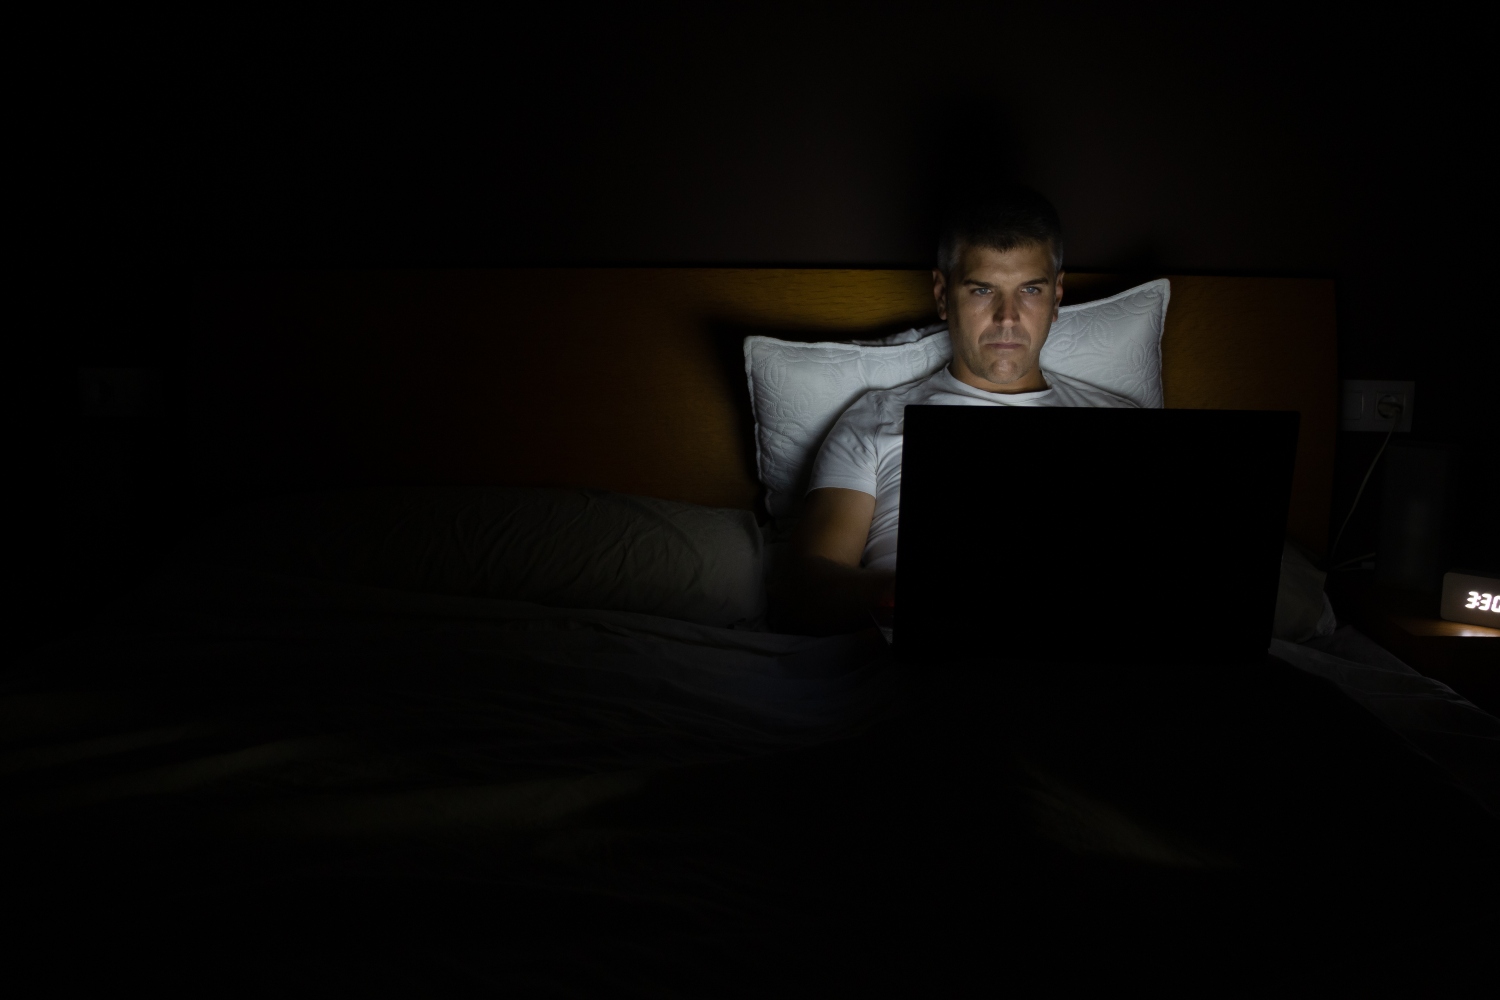 Man on his laptop in the bed at night. Platforms like Remojo promise to help men kick their porn habits